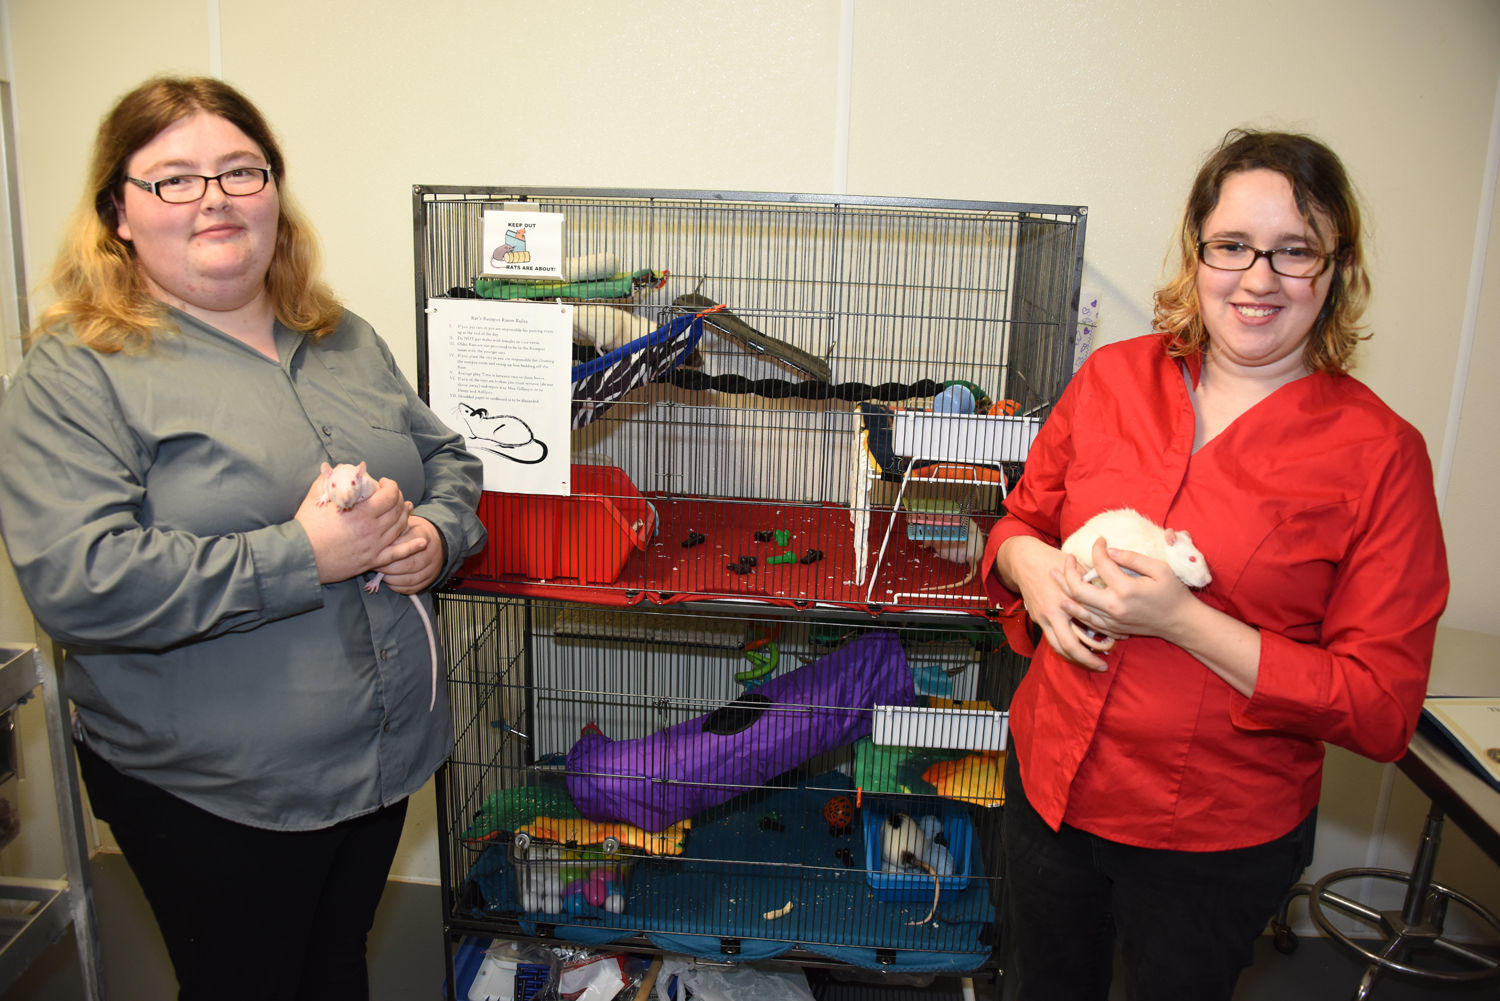 Ashlynn Yack (left) and Ebony Bays (right), junior veterinary technology majors from Byron, with their “Rumpus Room” laboratory rat enrichment center which recently claimed third place honors at the Southeastern Chapter of the American Association of Laboratory Animal Specialist competition in Decatur, Georgia.